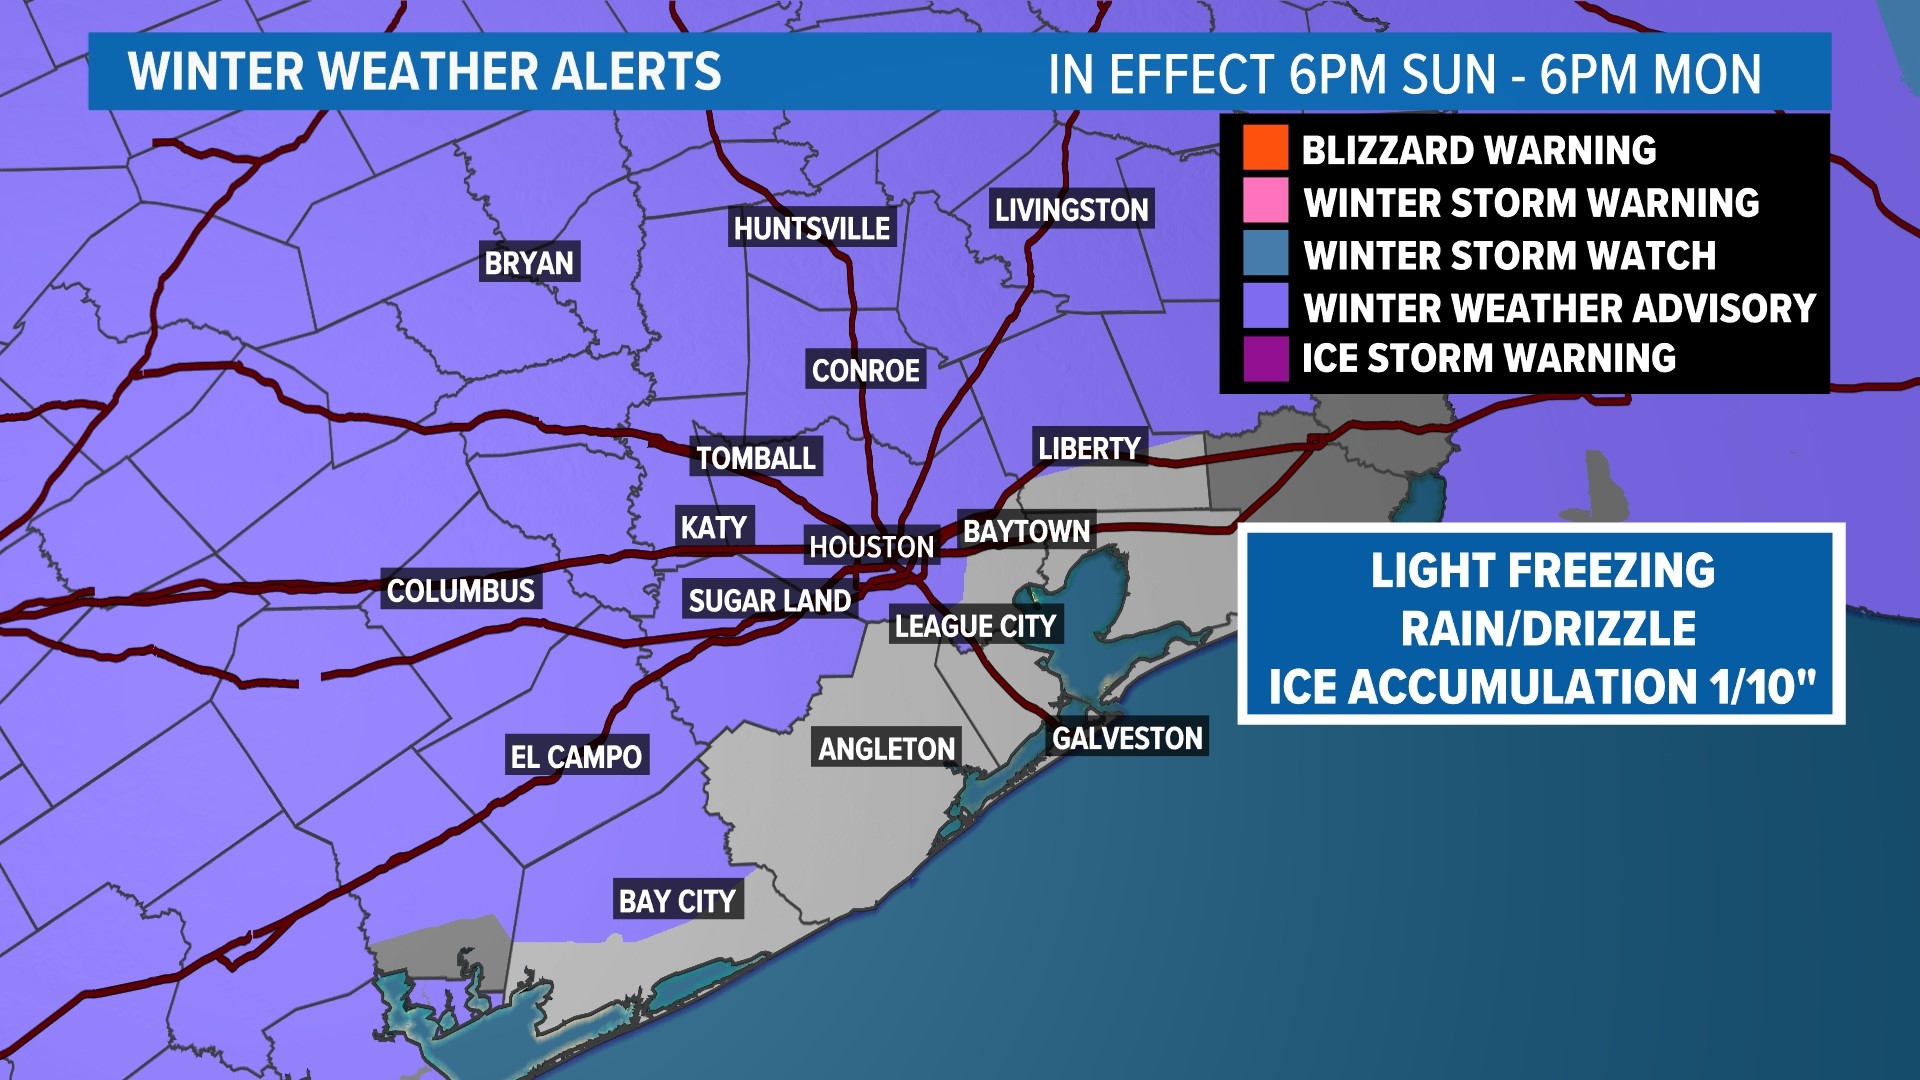 This is KHOU 11's coverage getting you ready for a hard freeze in the Houston area.